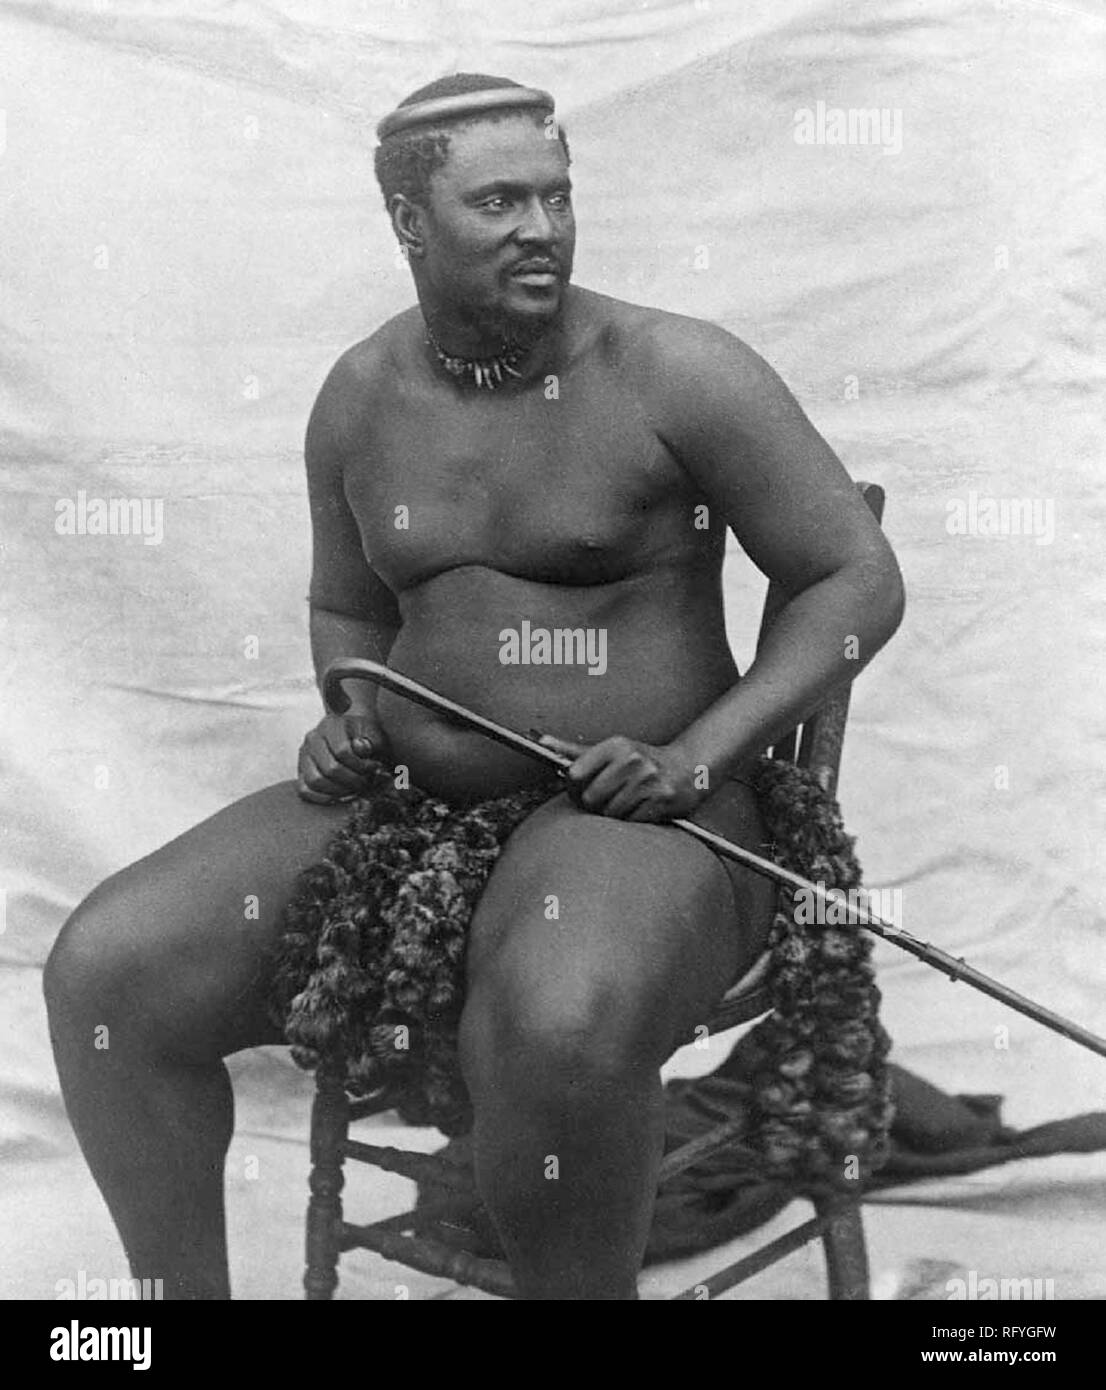 Prince Ndabuko kaMpande, (younger brother of King Cetshwayo kaMpande, who was the king of the Zulu Kingdom from 1873 to 1879 and its leader during the Anglo-Zulu War of 1879) Stock Photo